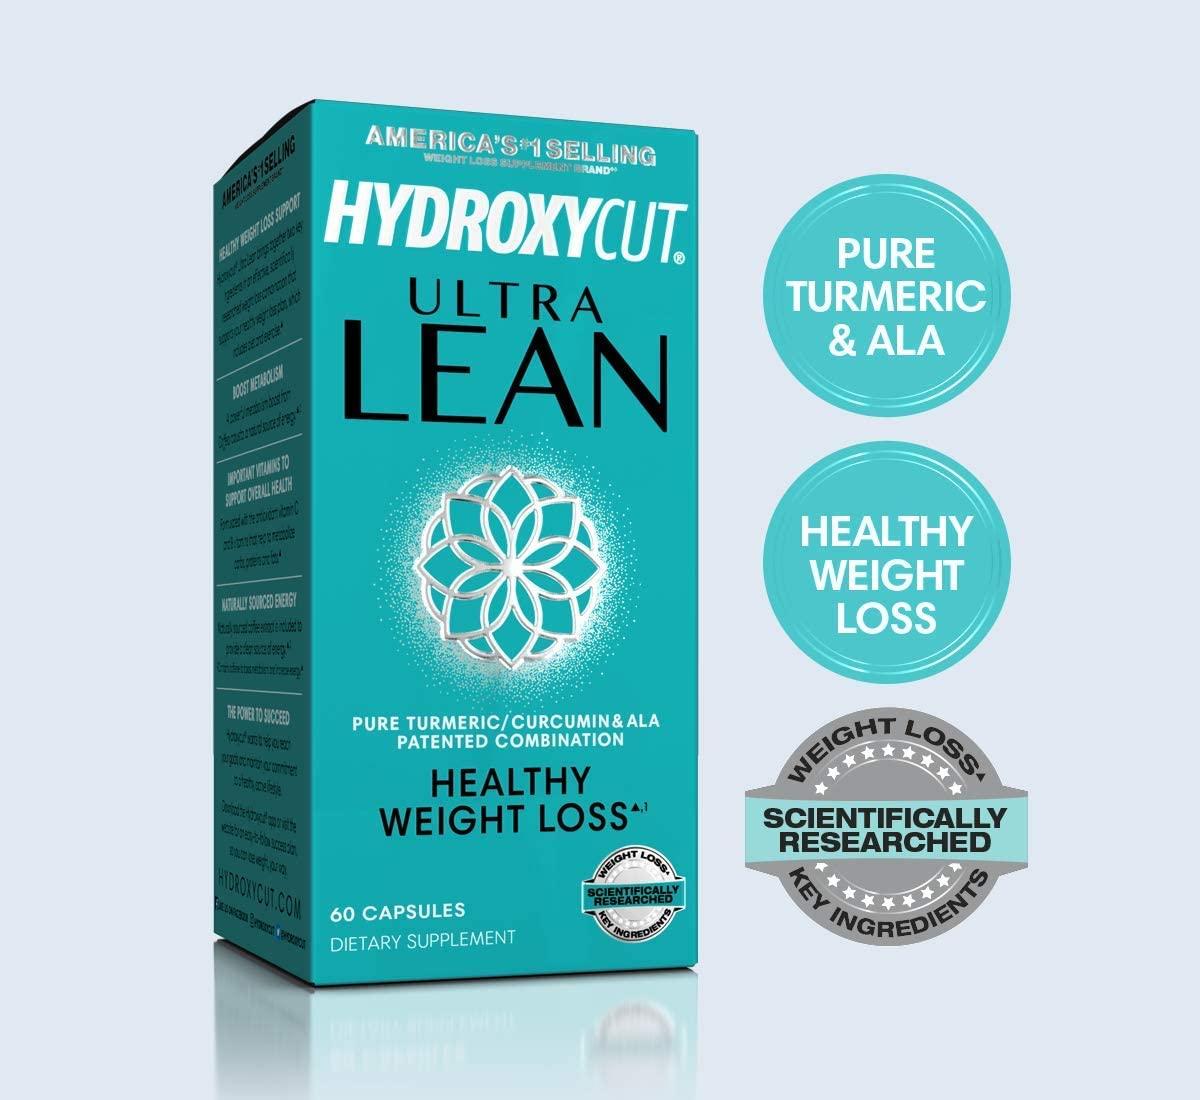 Hydroxycut Ultra Lean - Product Information